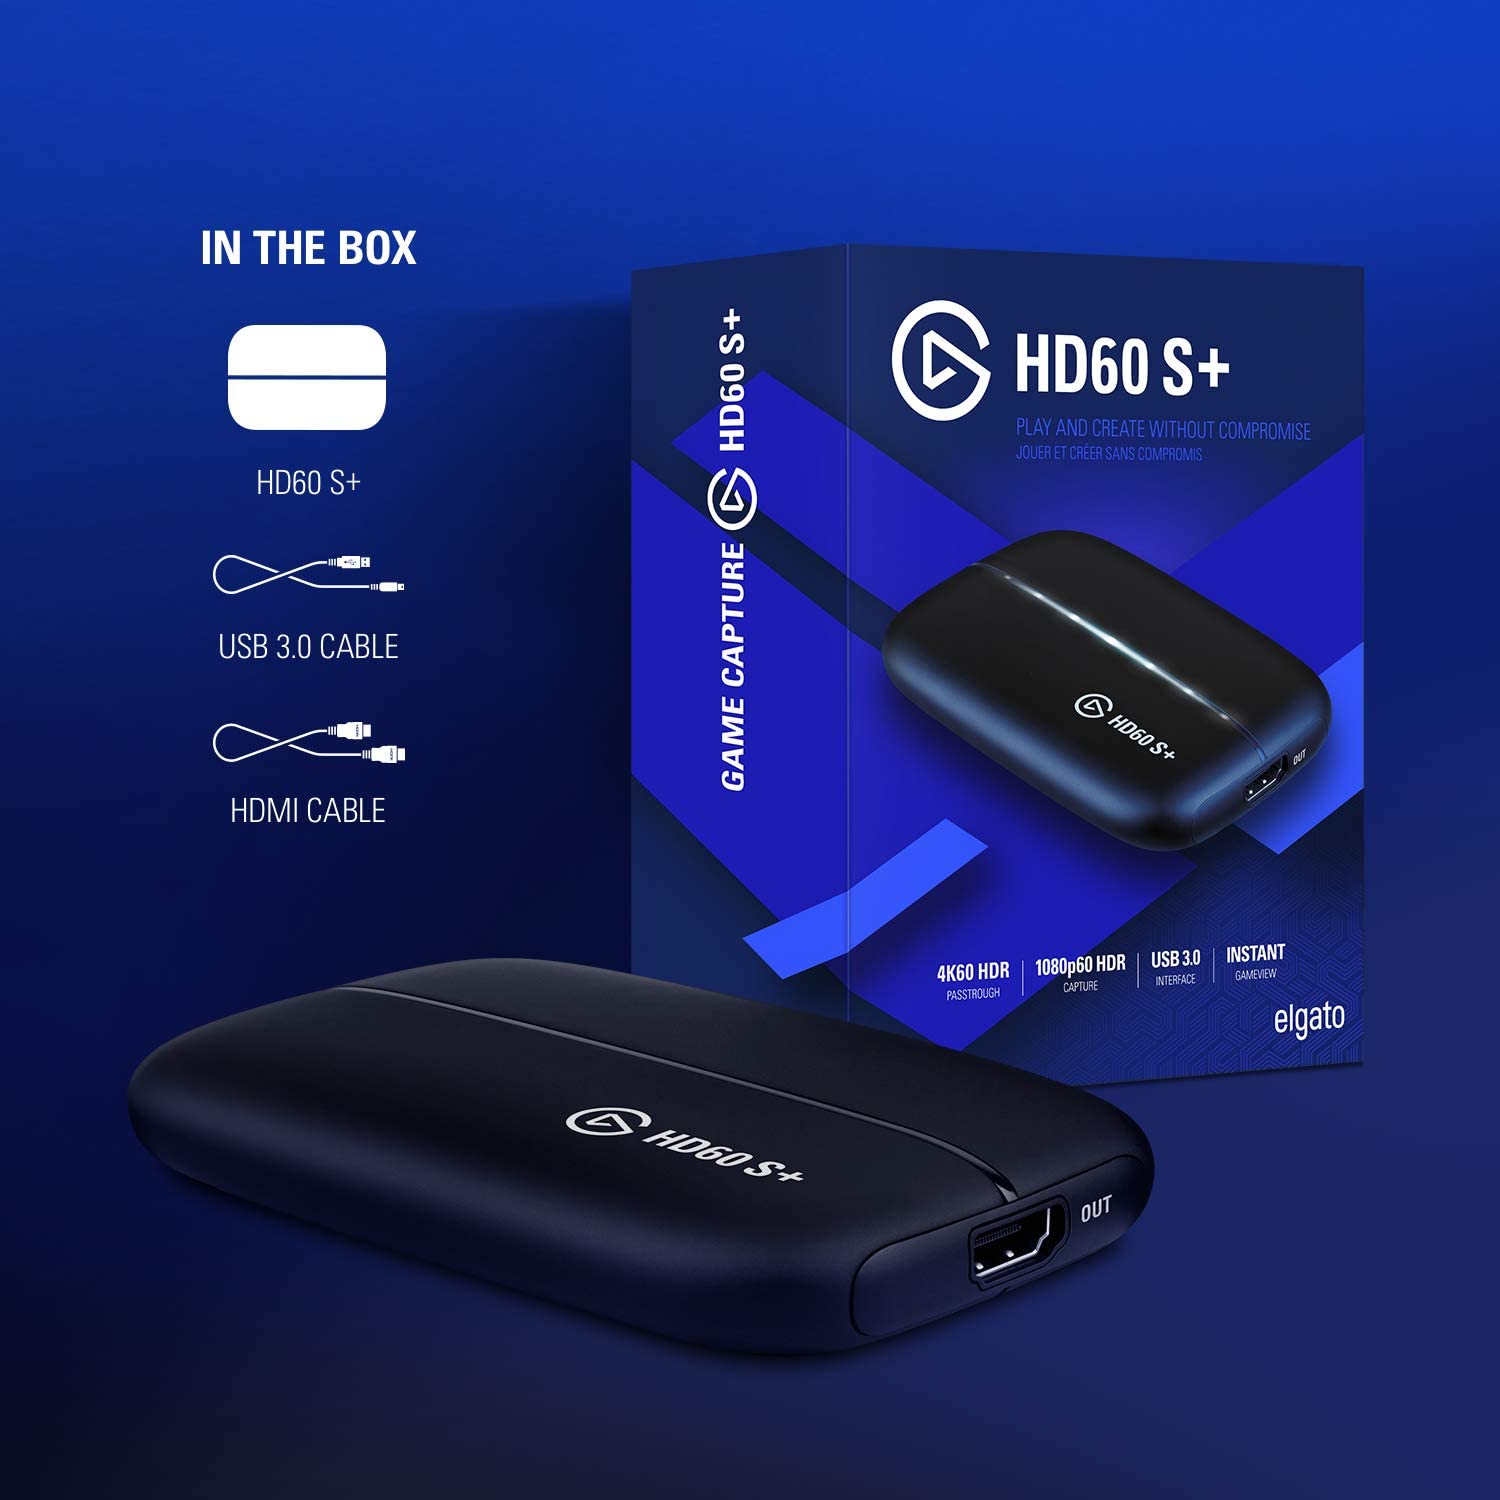 Elgato Game Capture Hd60 S 1080p60 Hdr10 Capture With 4k60 Hdr10 Zero Lag Passt